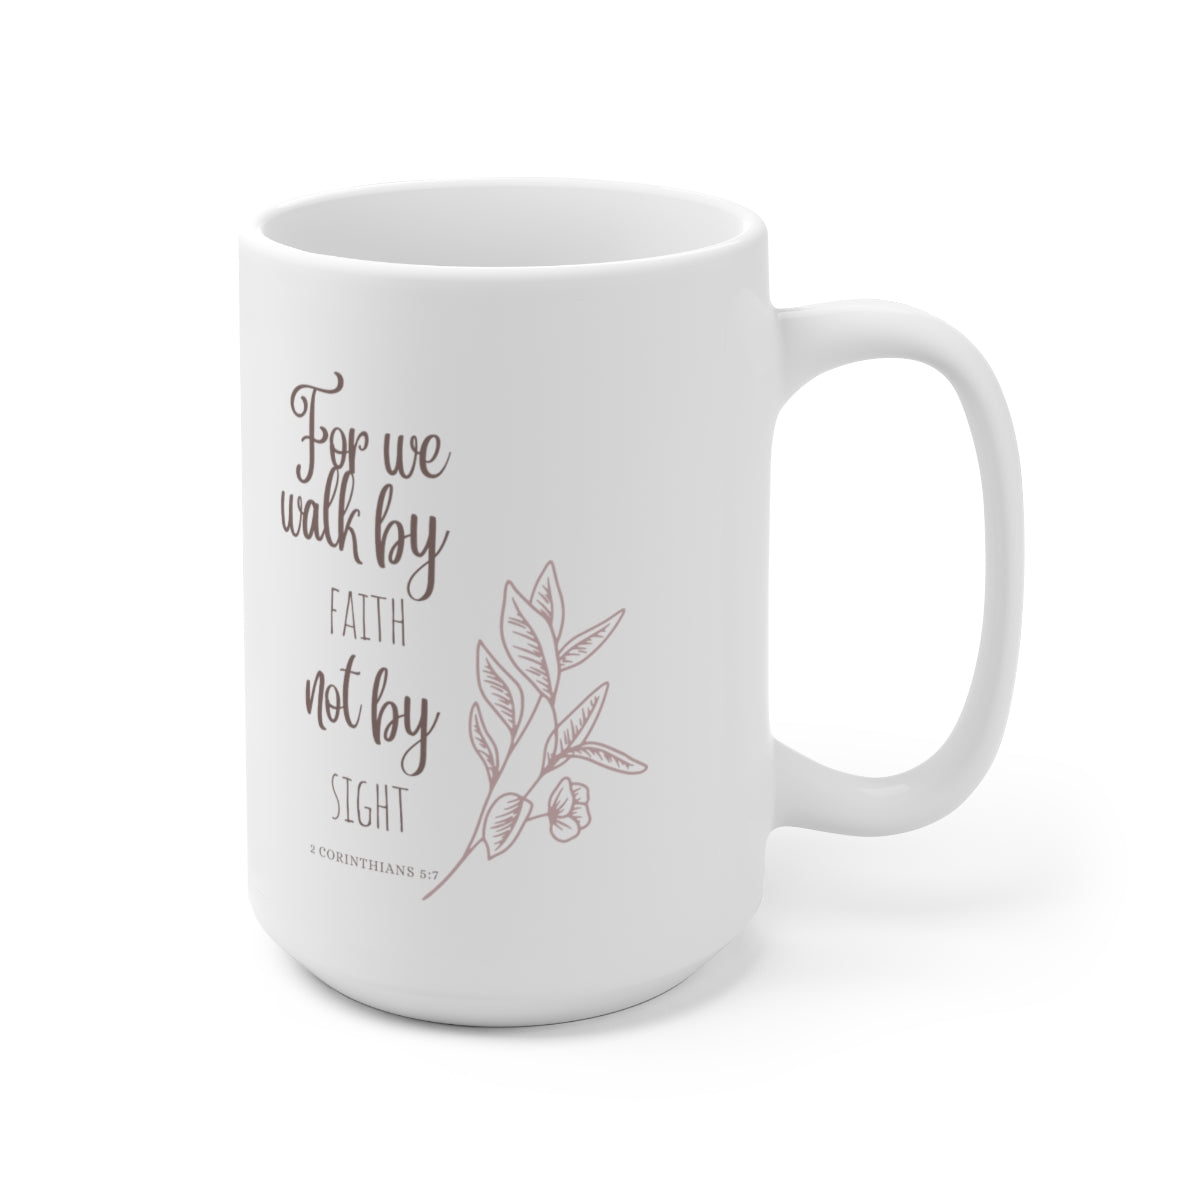 "Walk by Faith, not by Sight" 2 Corinthians 5:7 Ceramic Mug/Gifts for Her/Encouraging Gifts/Scripture Gifts